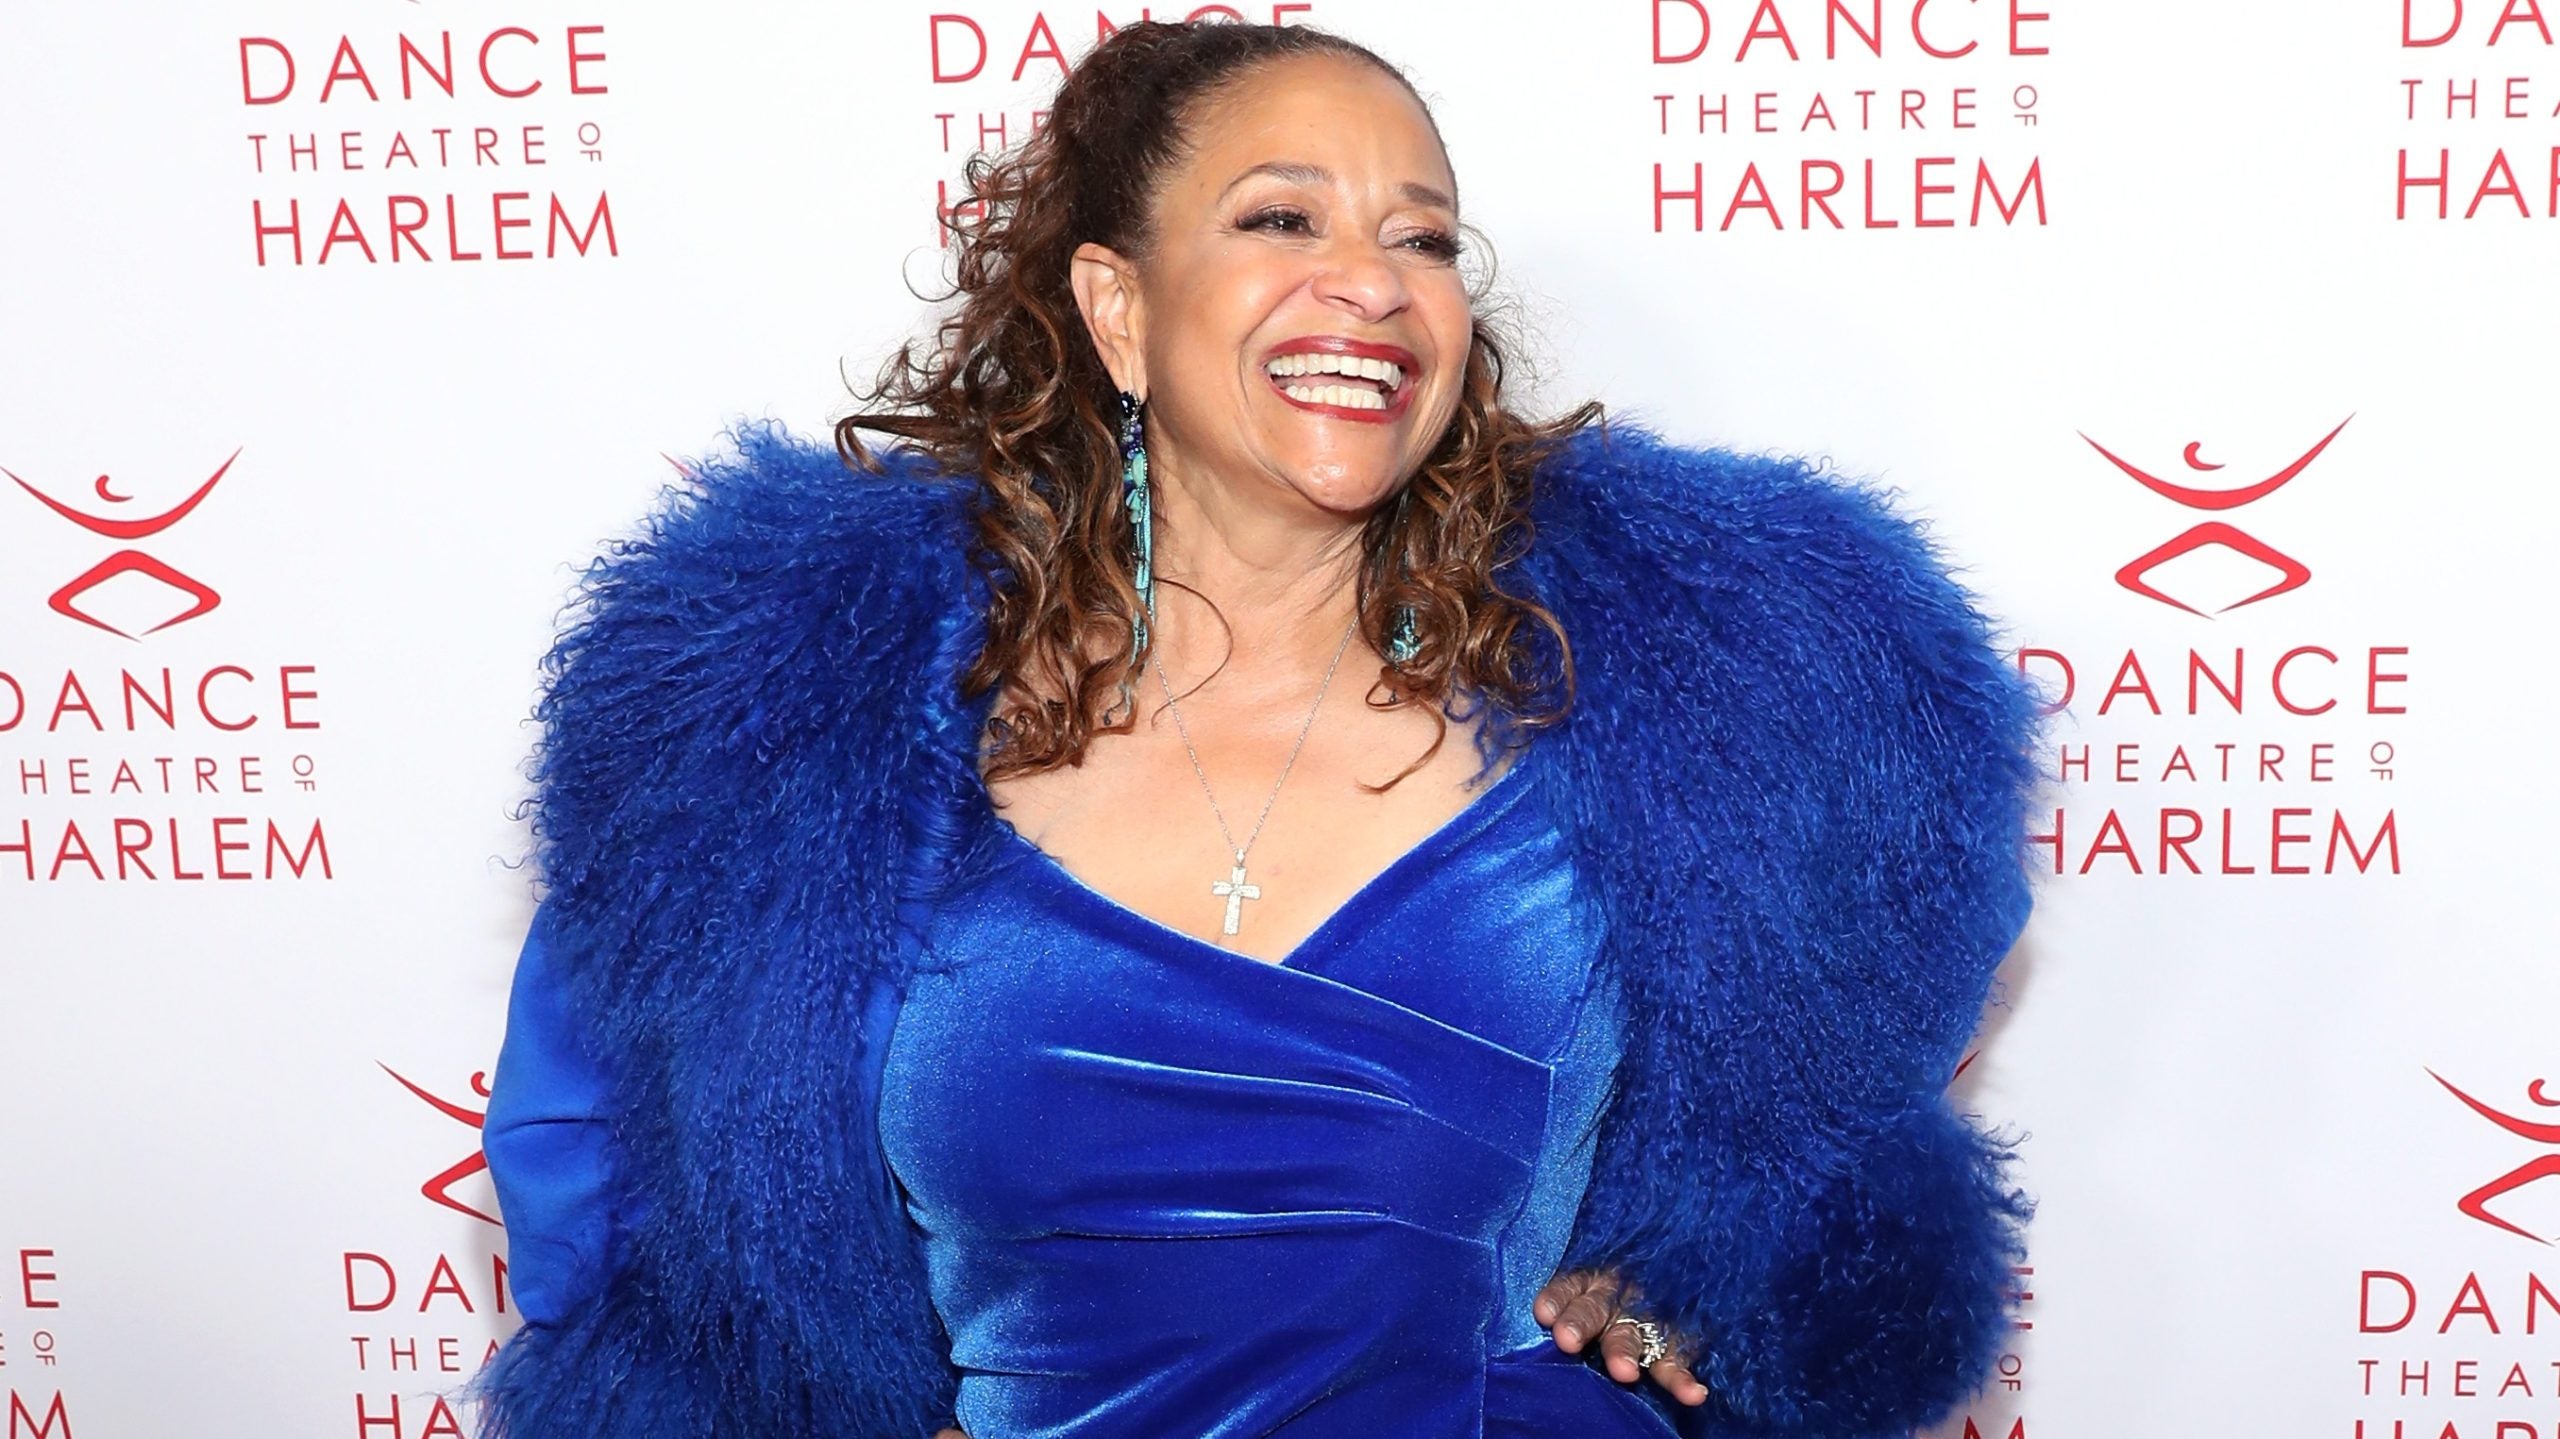 Sunny Hostin, Carla Hall, Anna Glass Honor Debbie Allen's Style, Beauty And Contribution To Dance